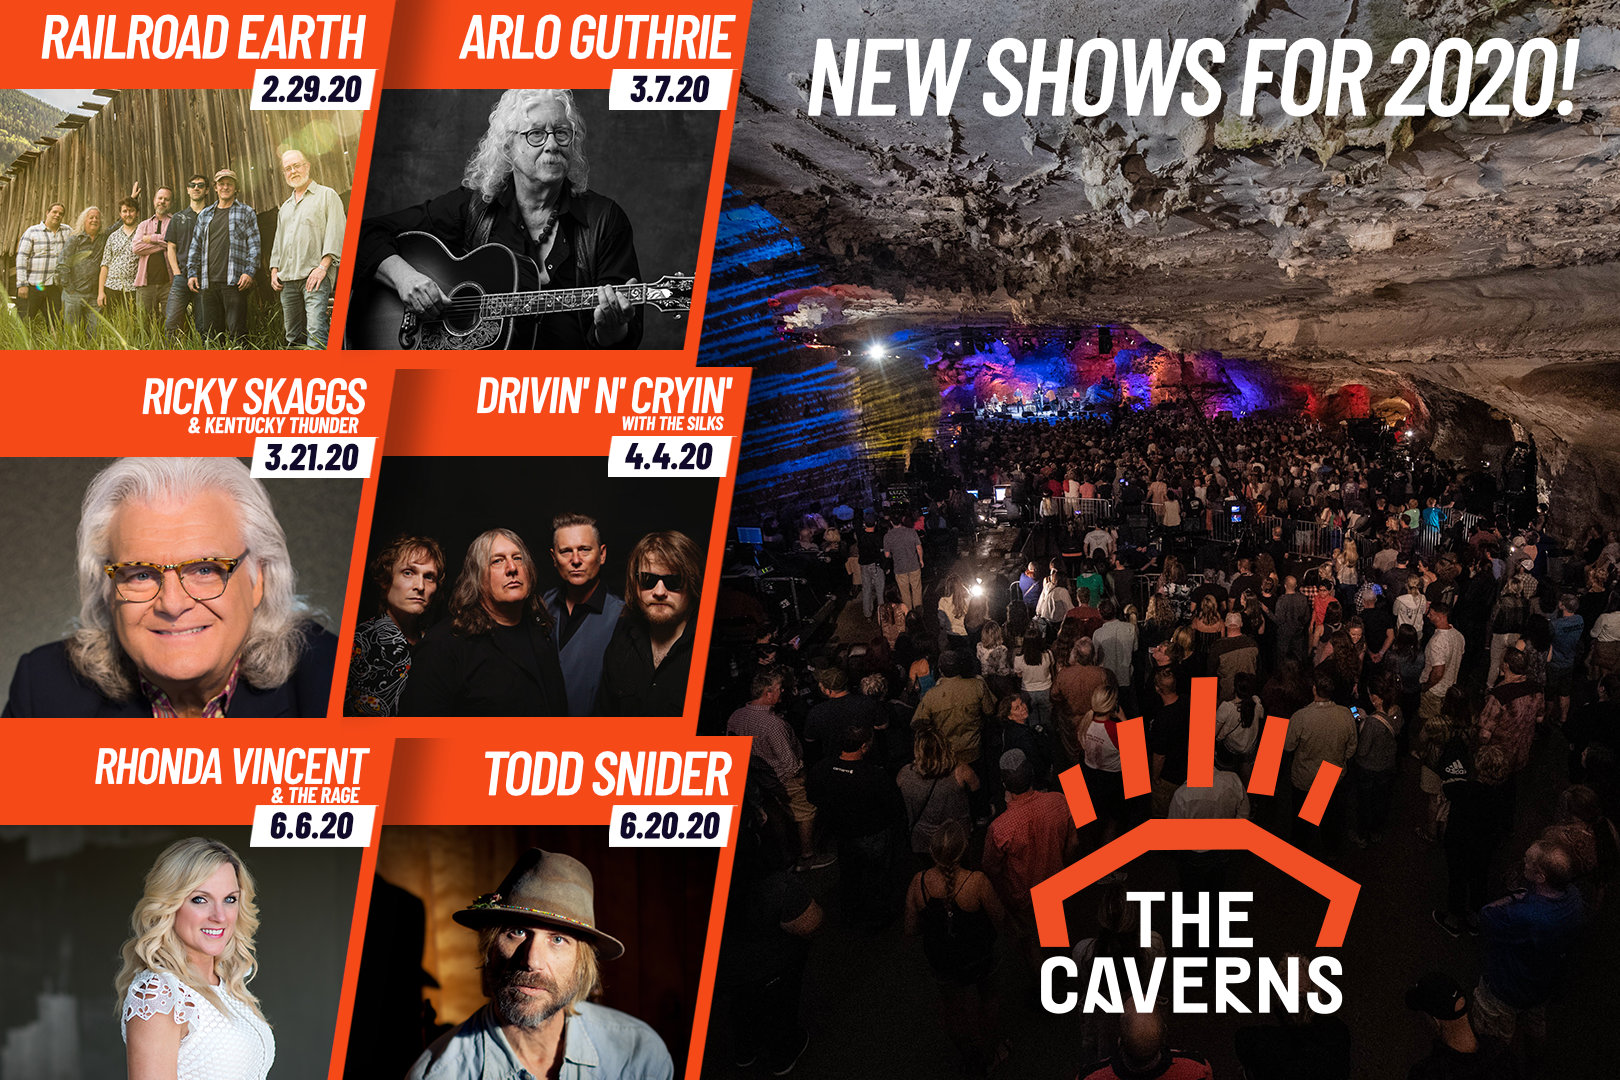 The Caverns Announces Five New Shows for 2020